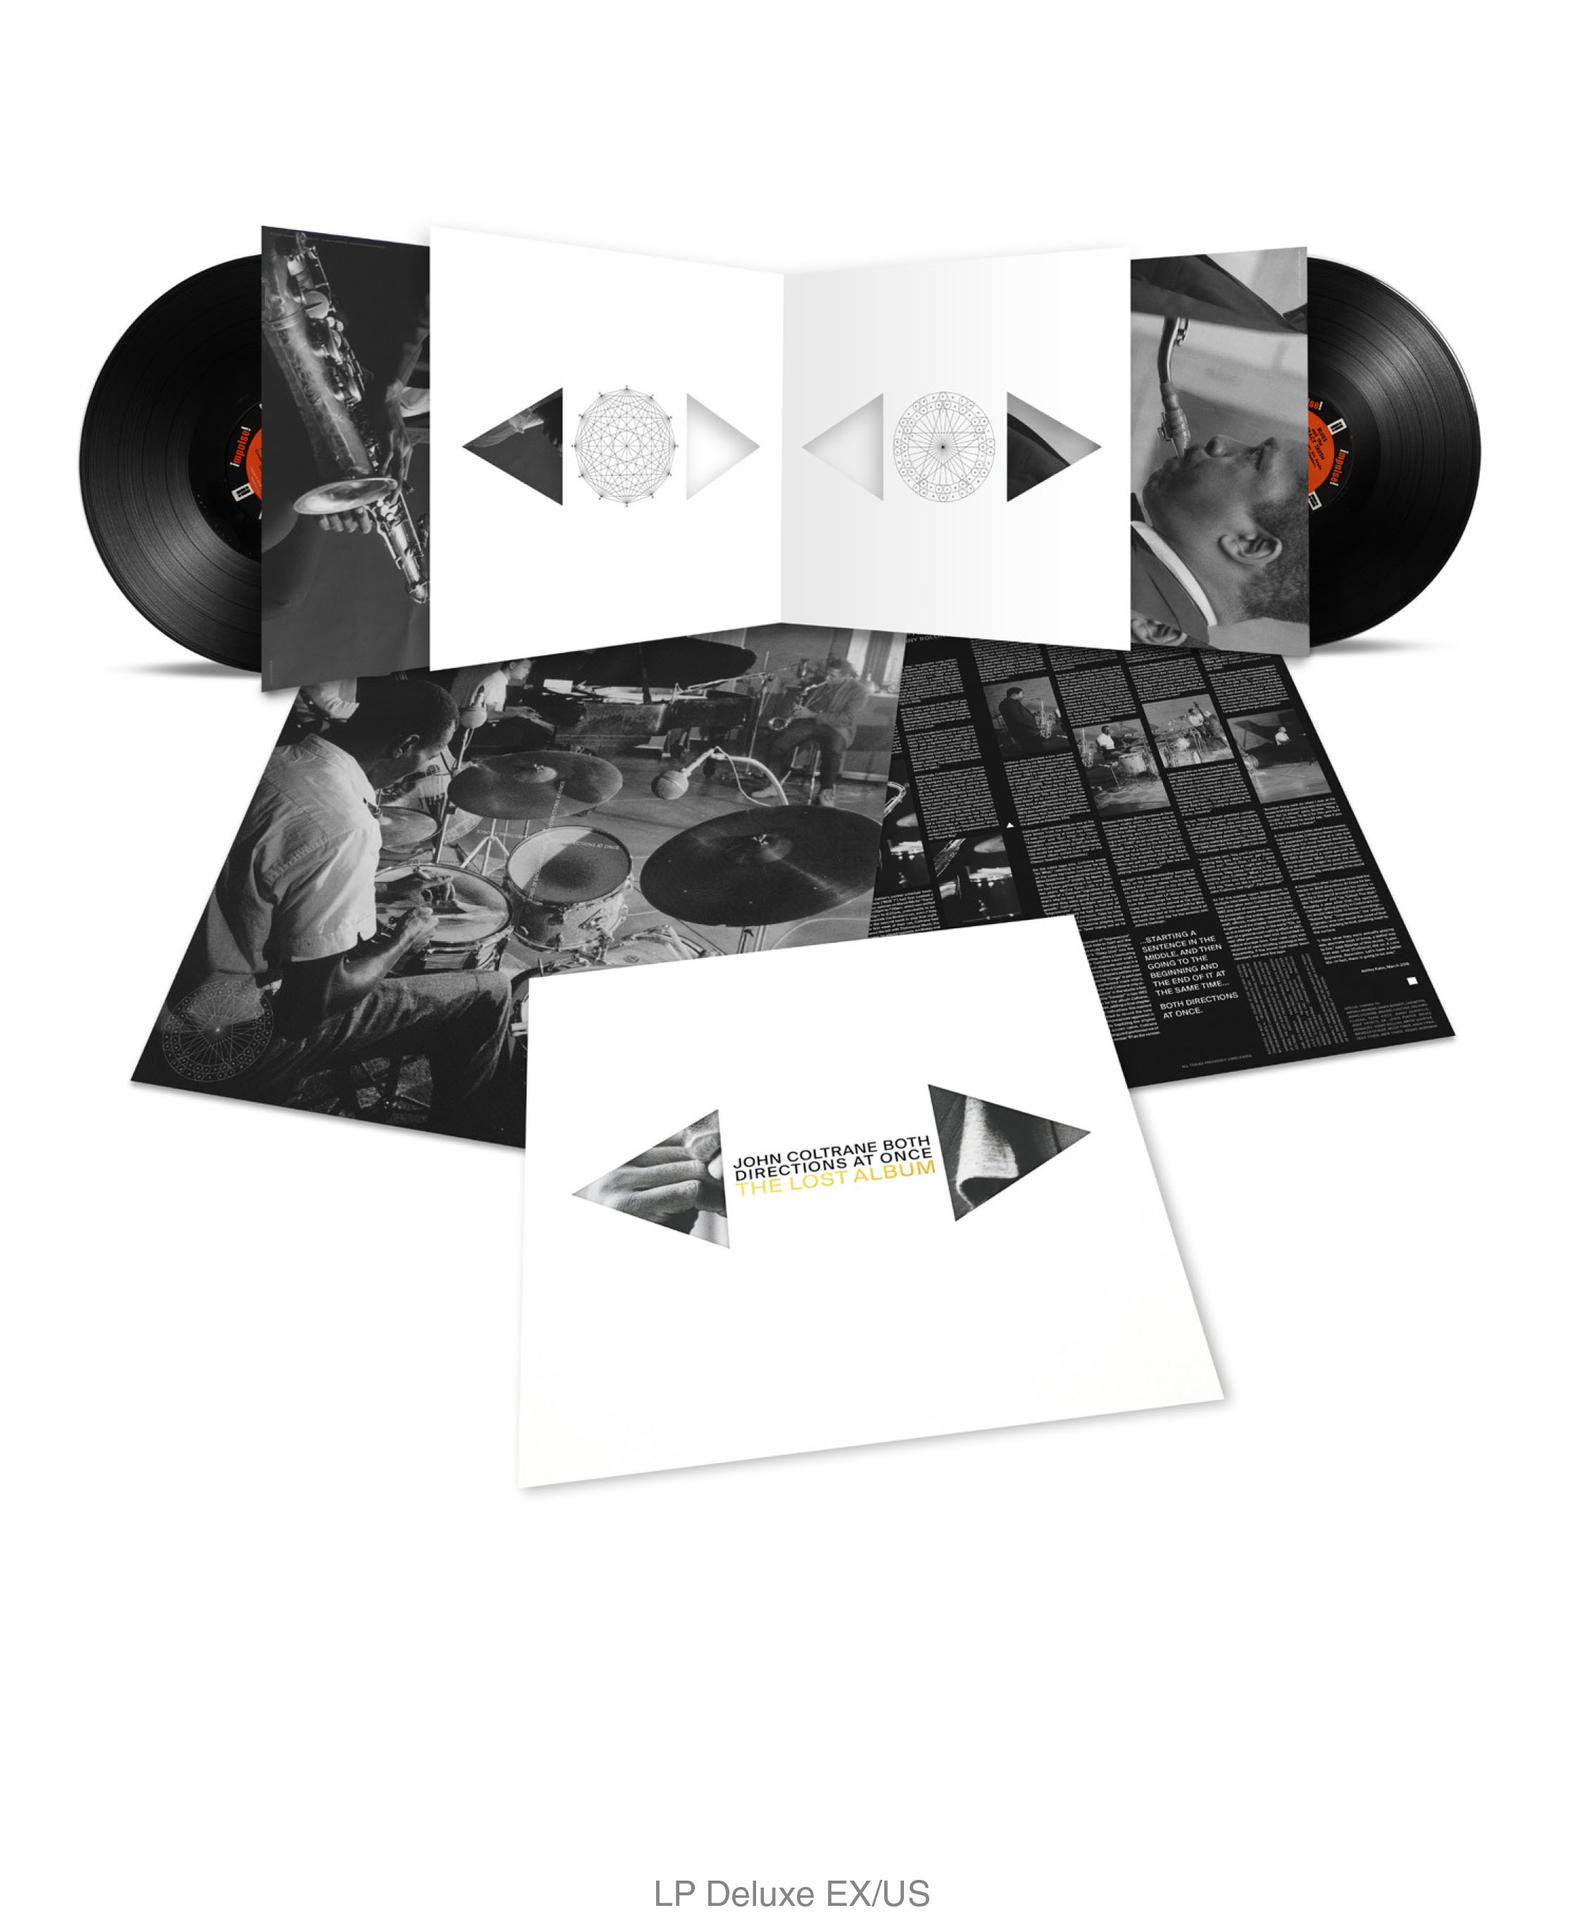 At - - Once Edition) Both The Directions Album (Vinyl) - Lost John (Deluxe Coltrane